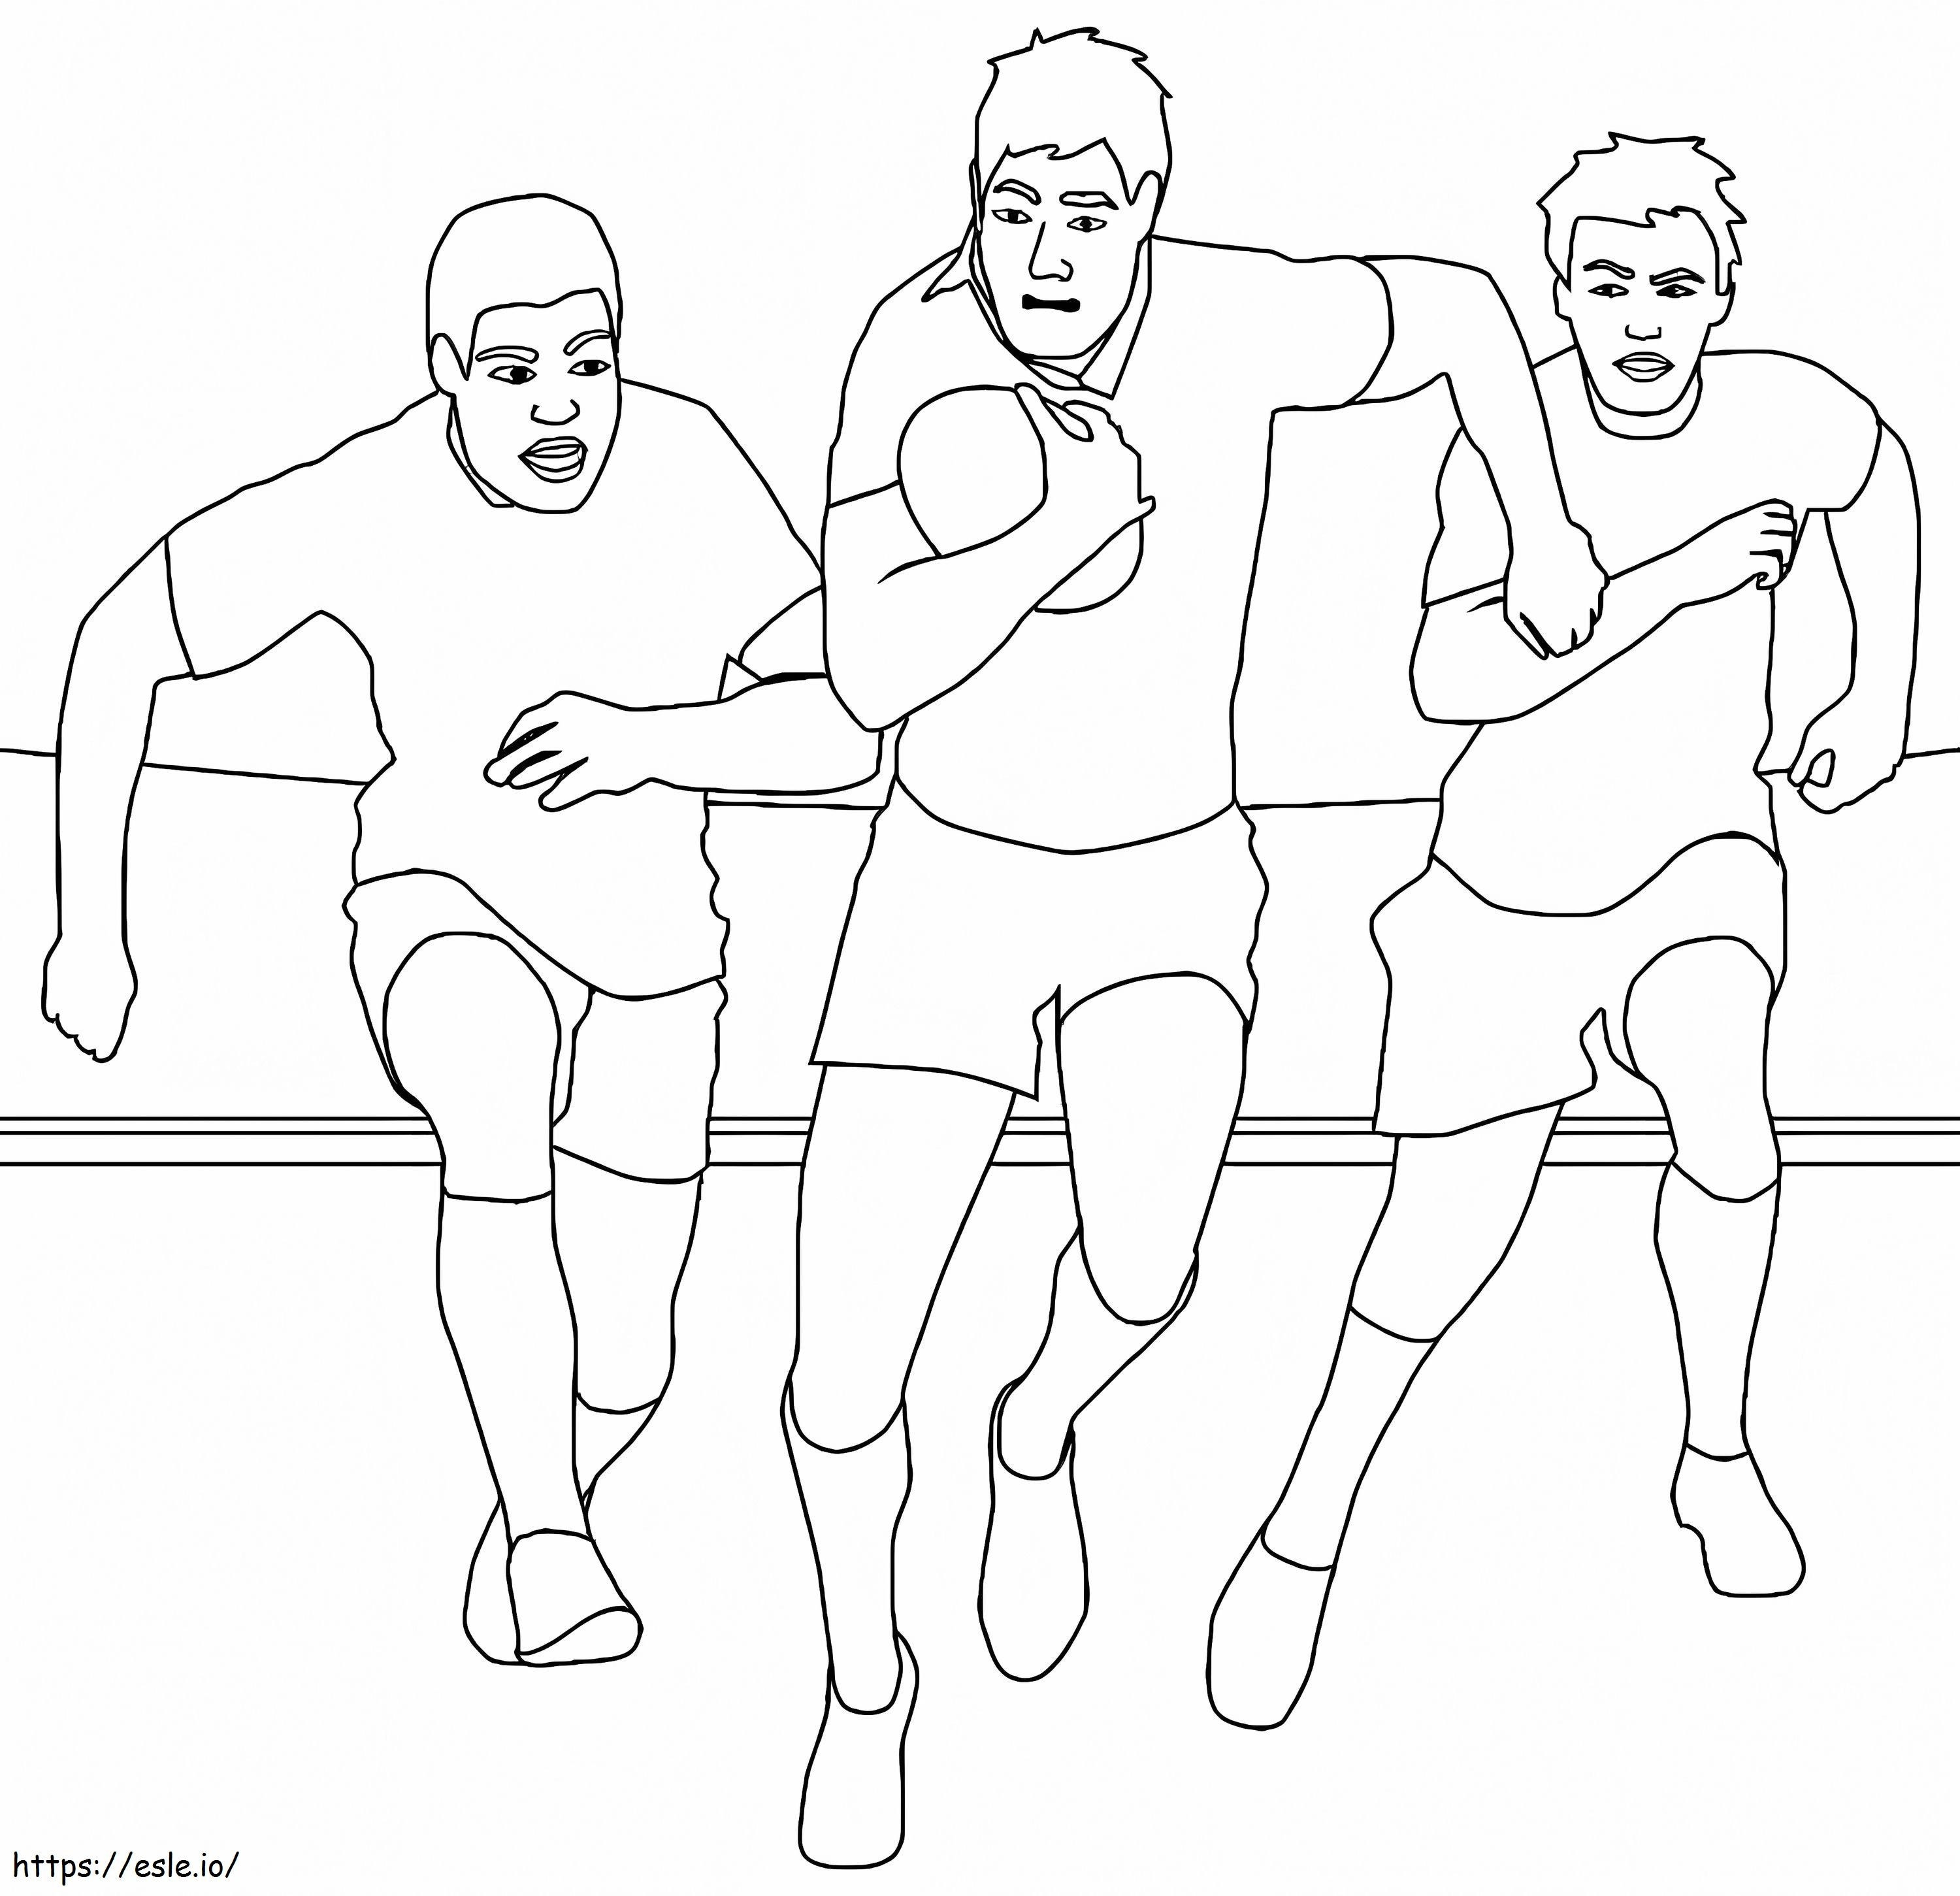 Printable Rugby coloring page